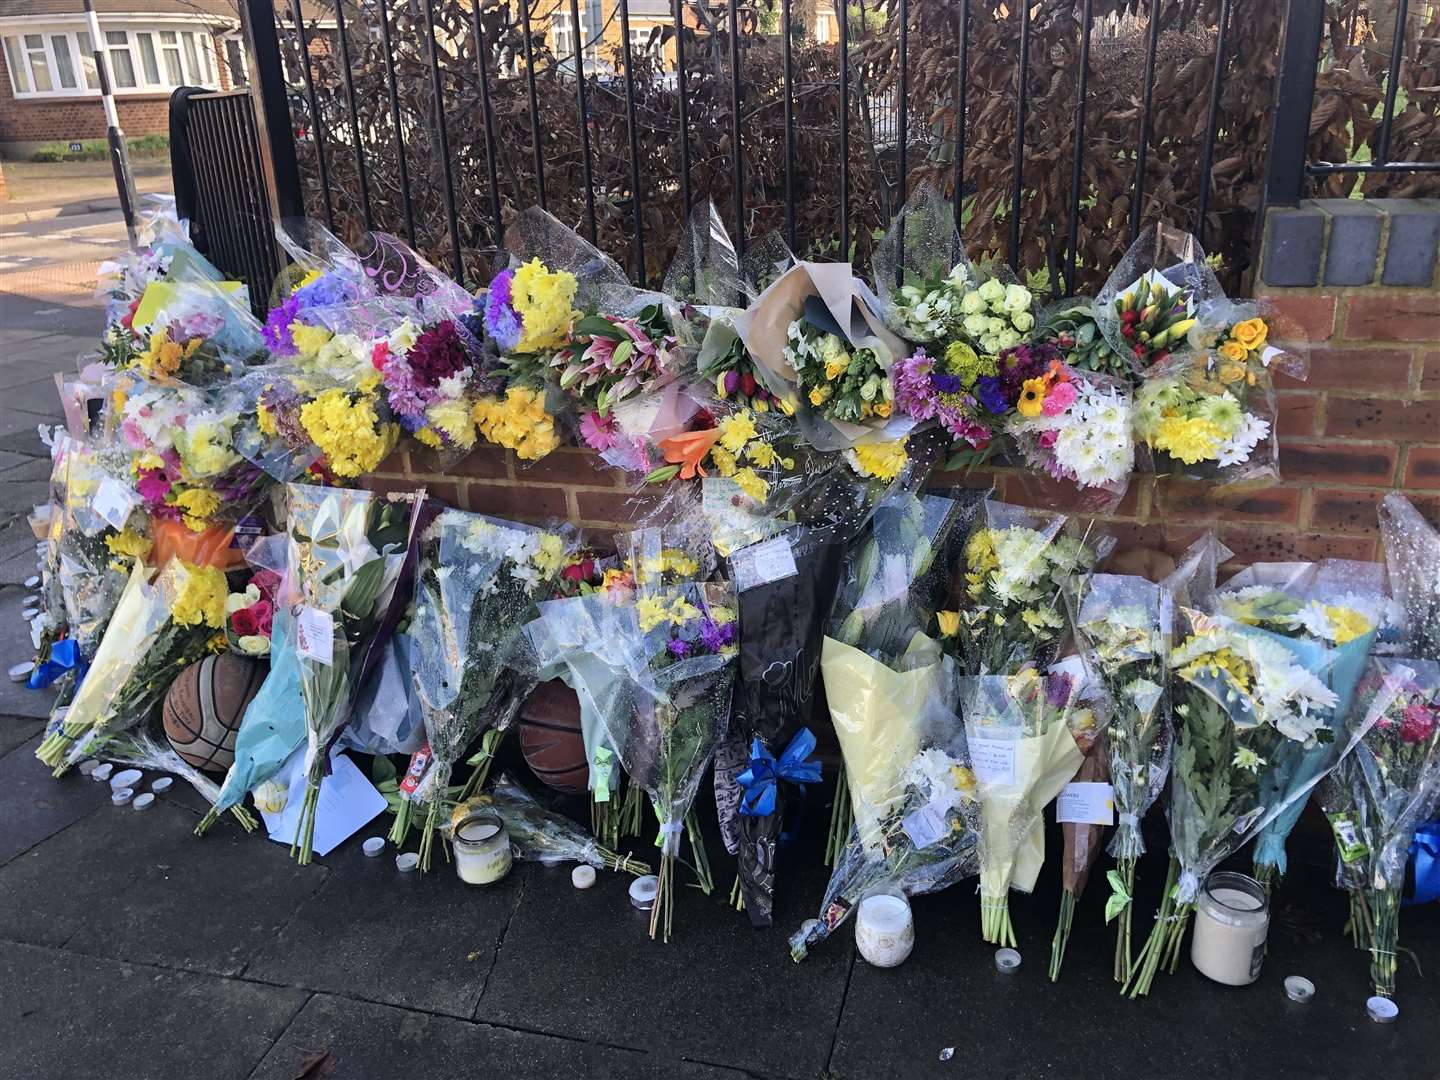 Floral, candle and basketball tributes were laid for Szymon